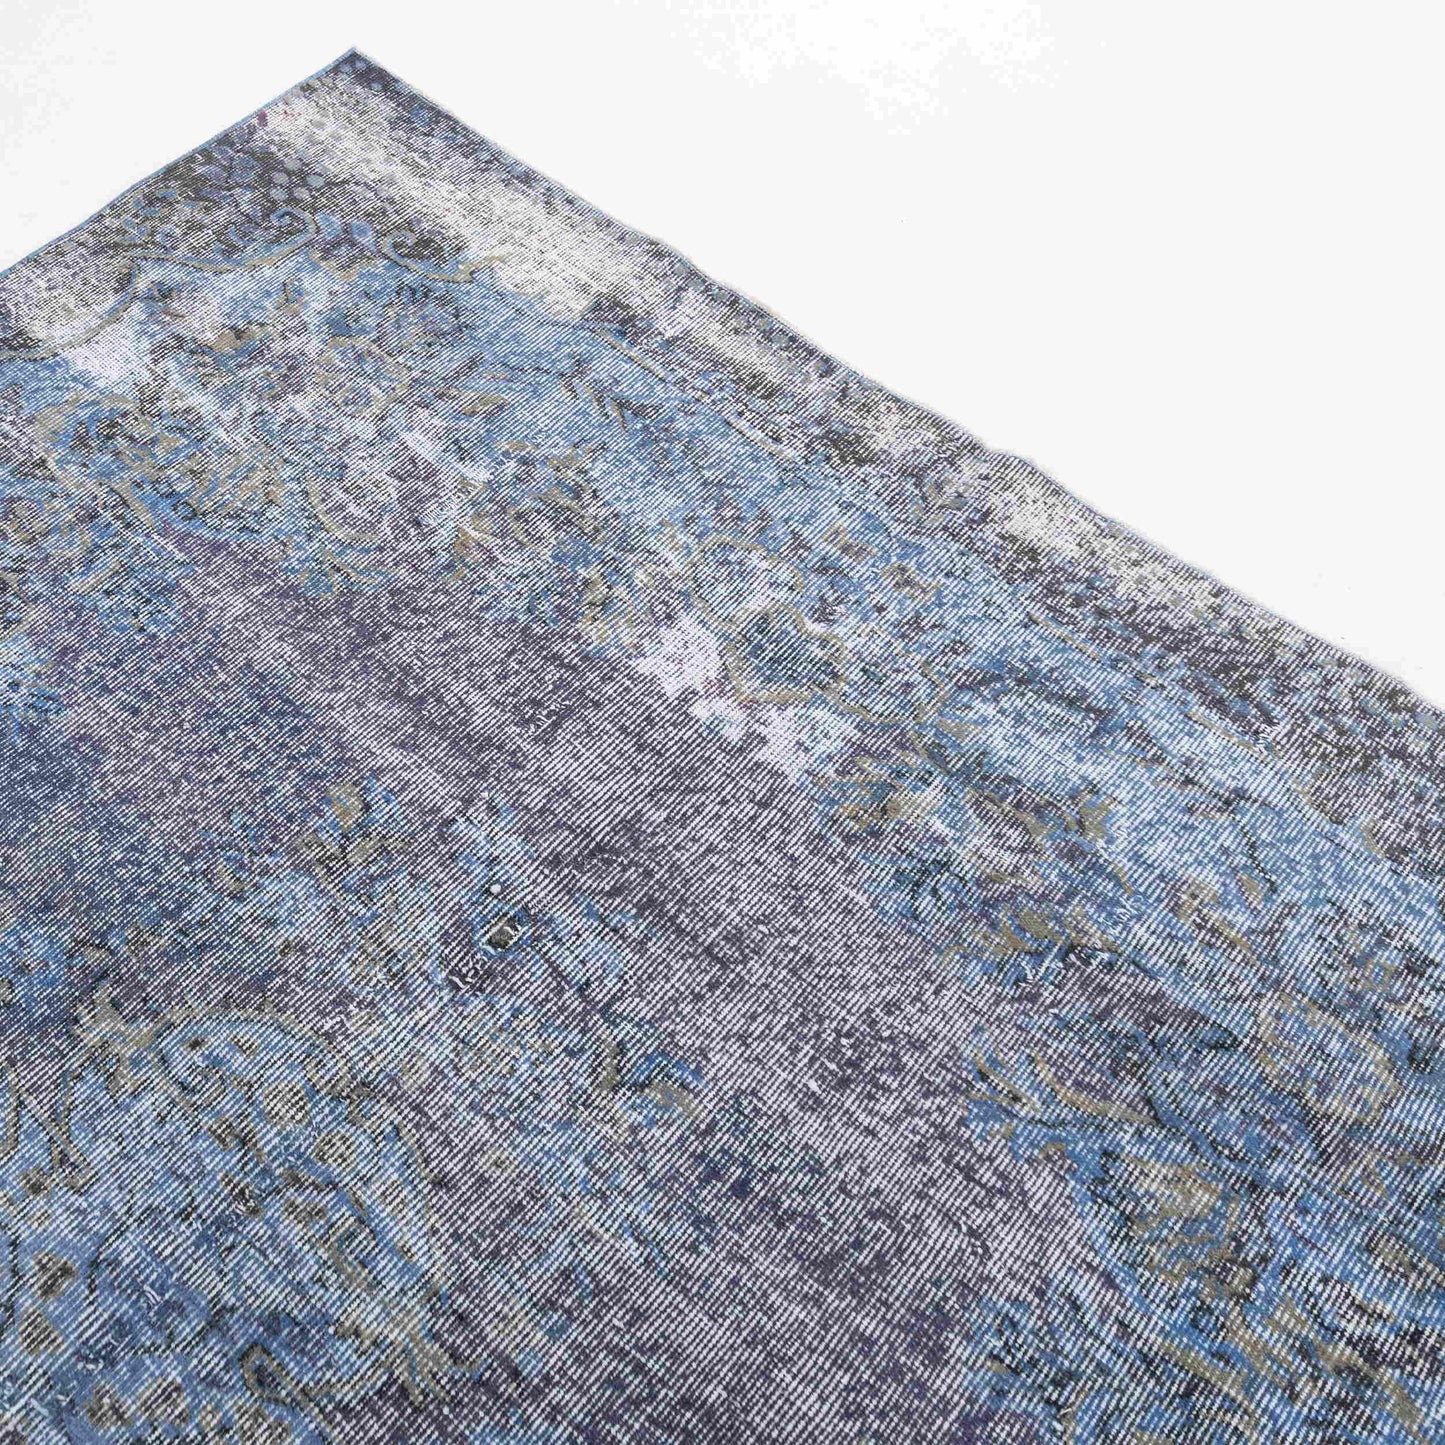 Oriental Rug Vintage Hand Knotted Wool On Cotton 191 x 298 Cm - 6' 4'' x 9' 10'' Navy Blue C012 ER12